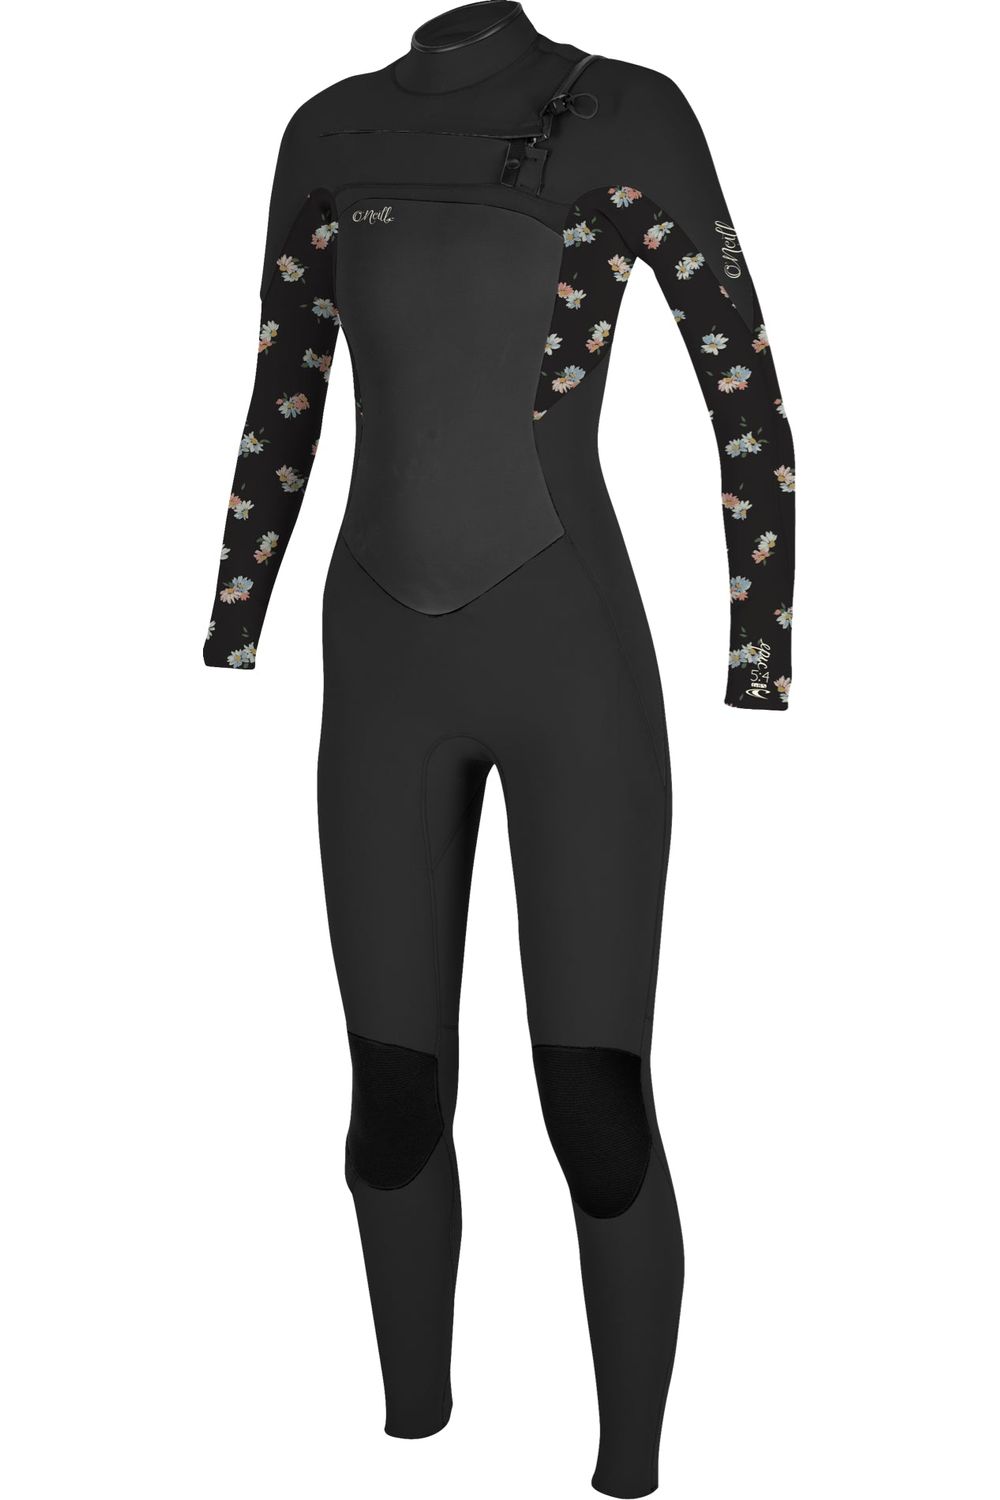 O'Neill Women's Epic Wetsuit 5/4 With Chest Zip